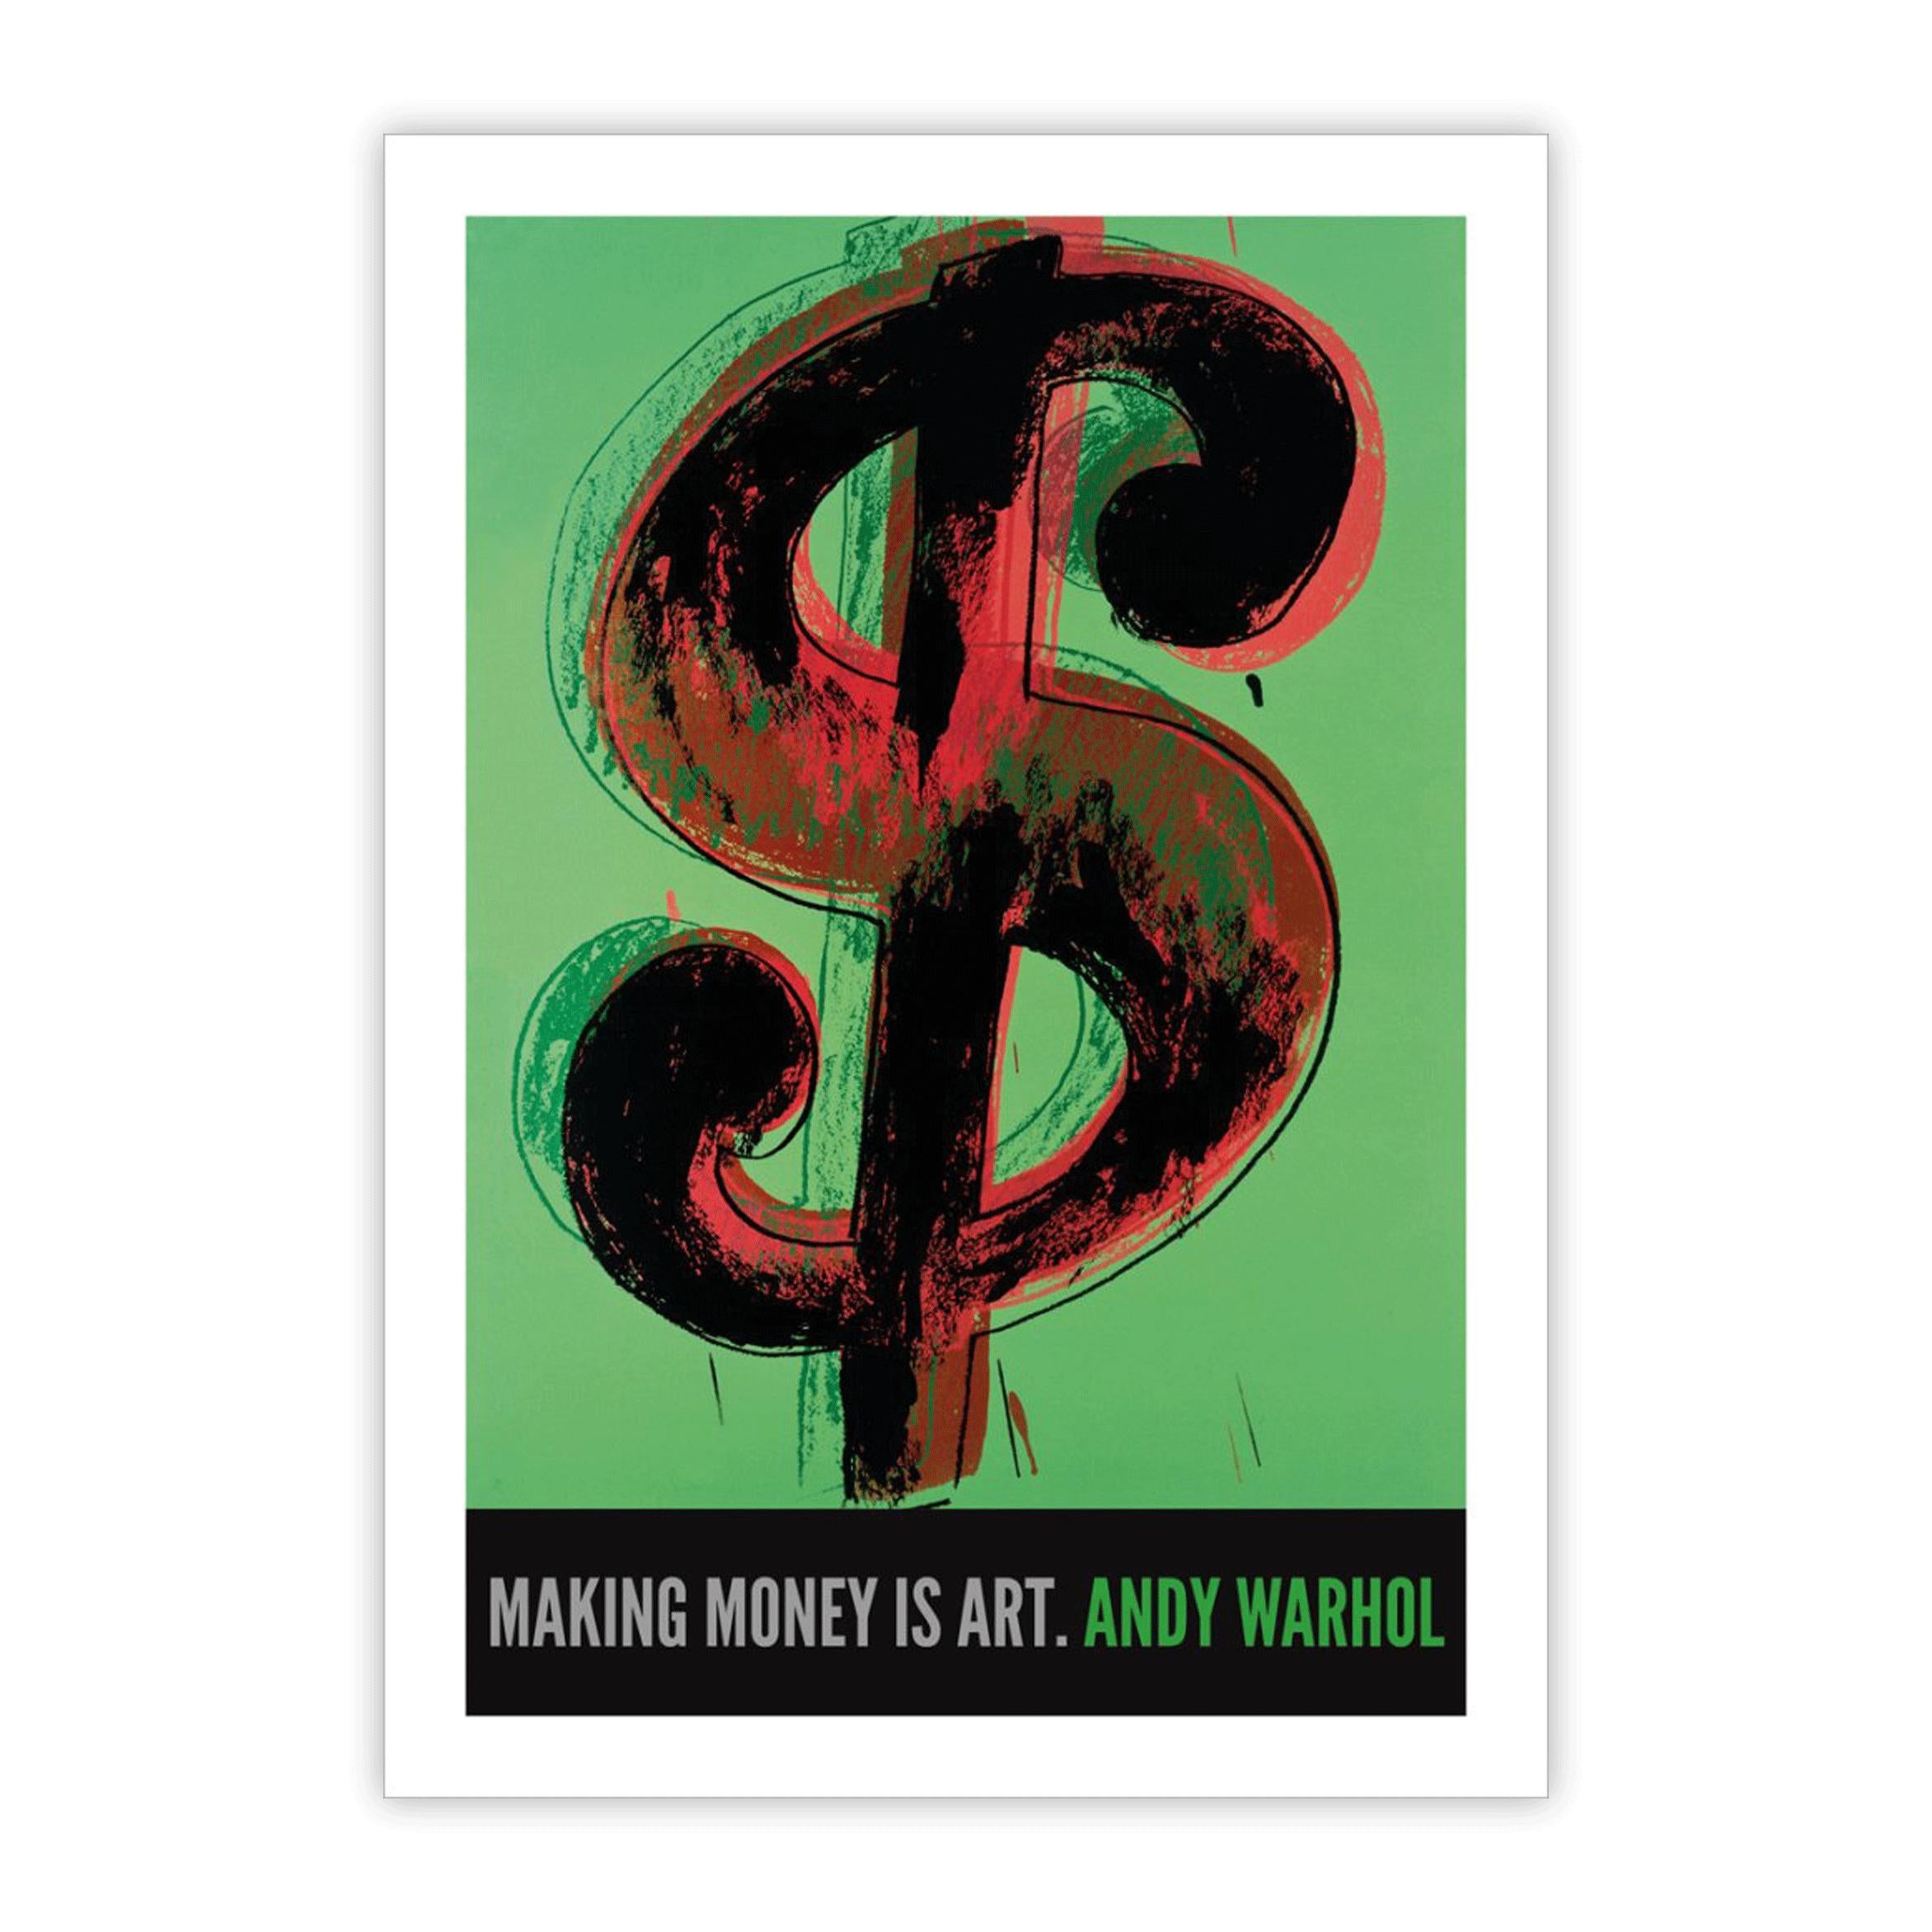 Andy's iconic $1, beautifully reproduced as a giclée print on heavyweight watercolour paper with his words 'Making money is art.' This large poster will look superb in any style of interior. 

Paper size 100 x 70 cm image size 90 x 60 cm. Please